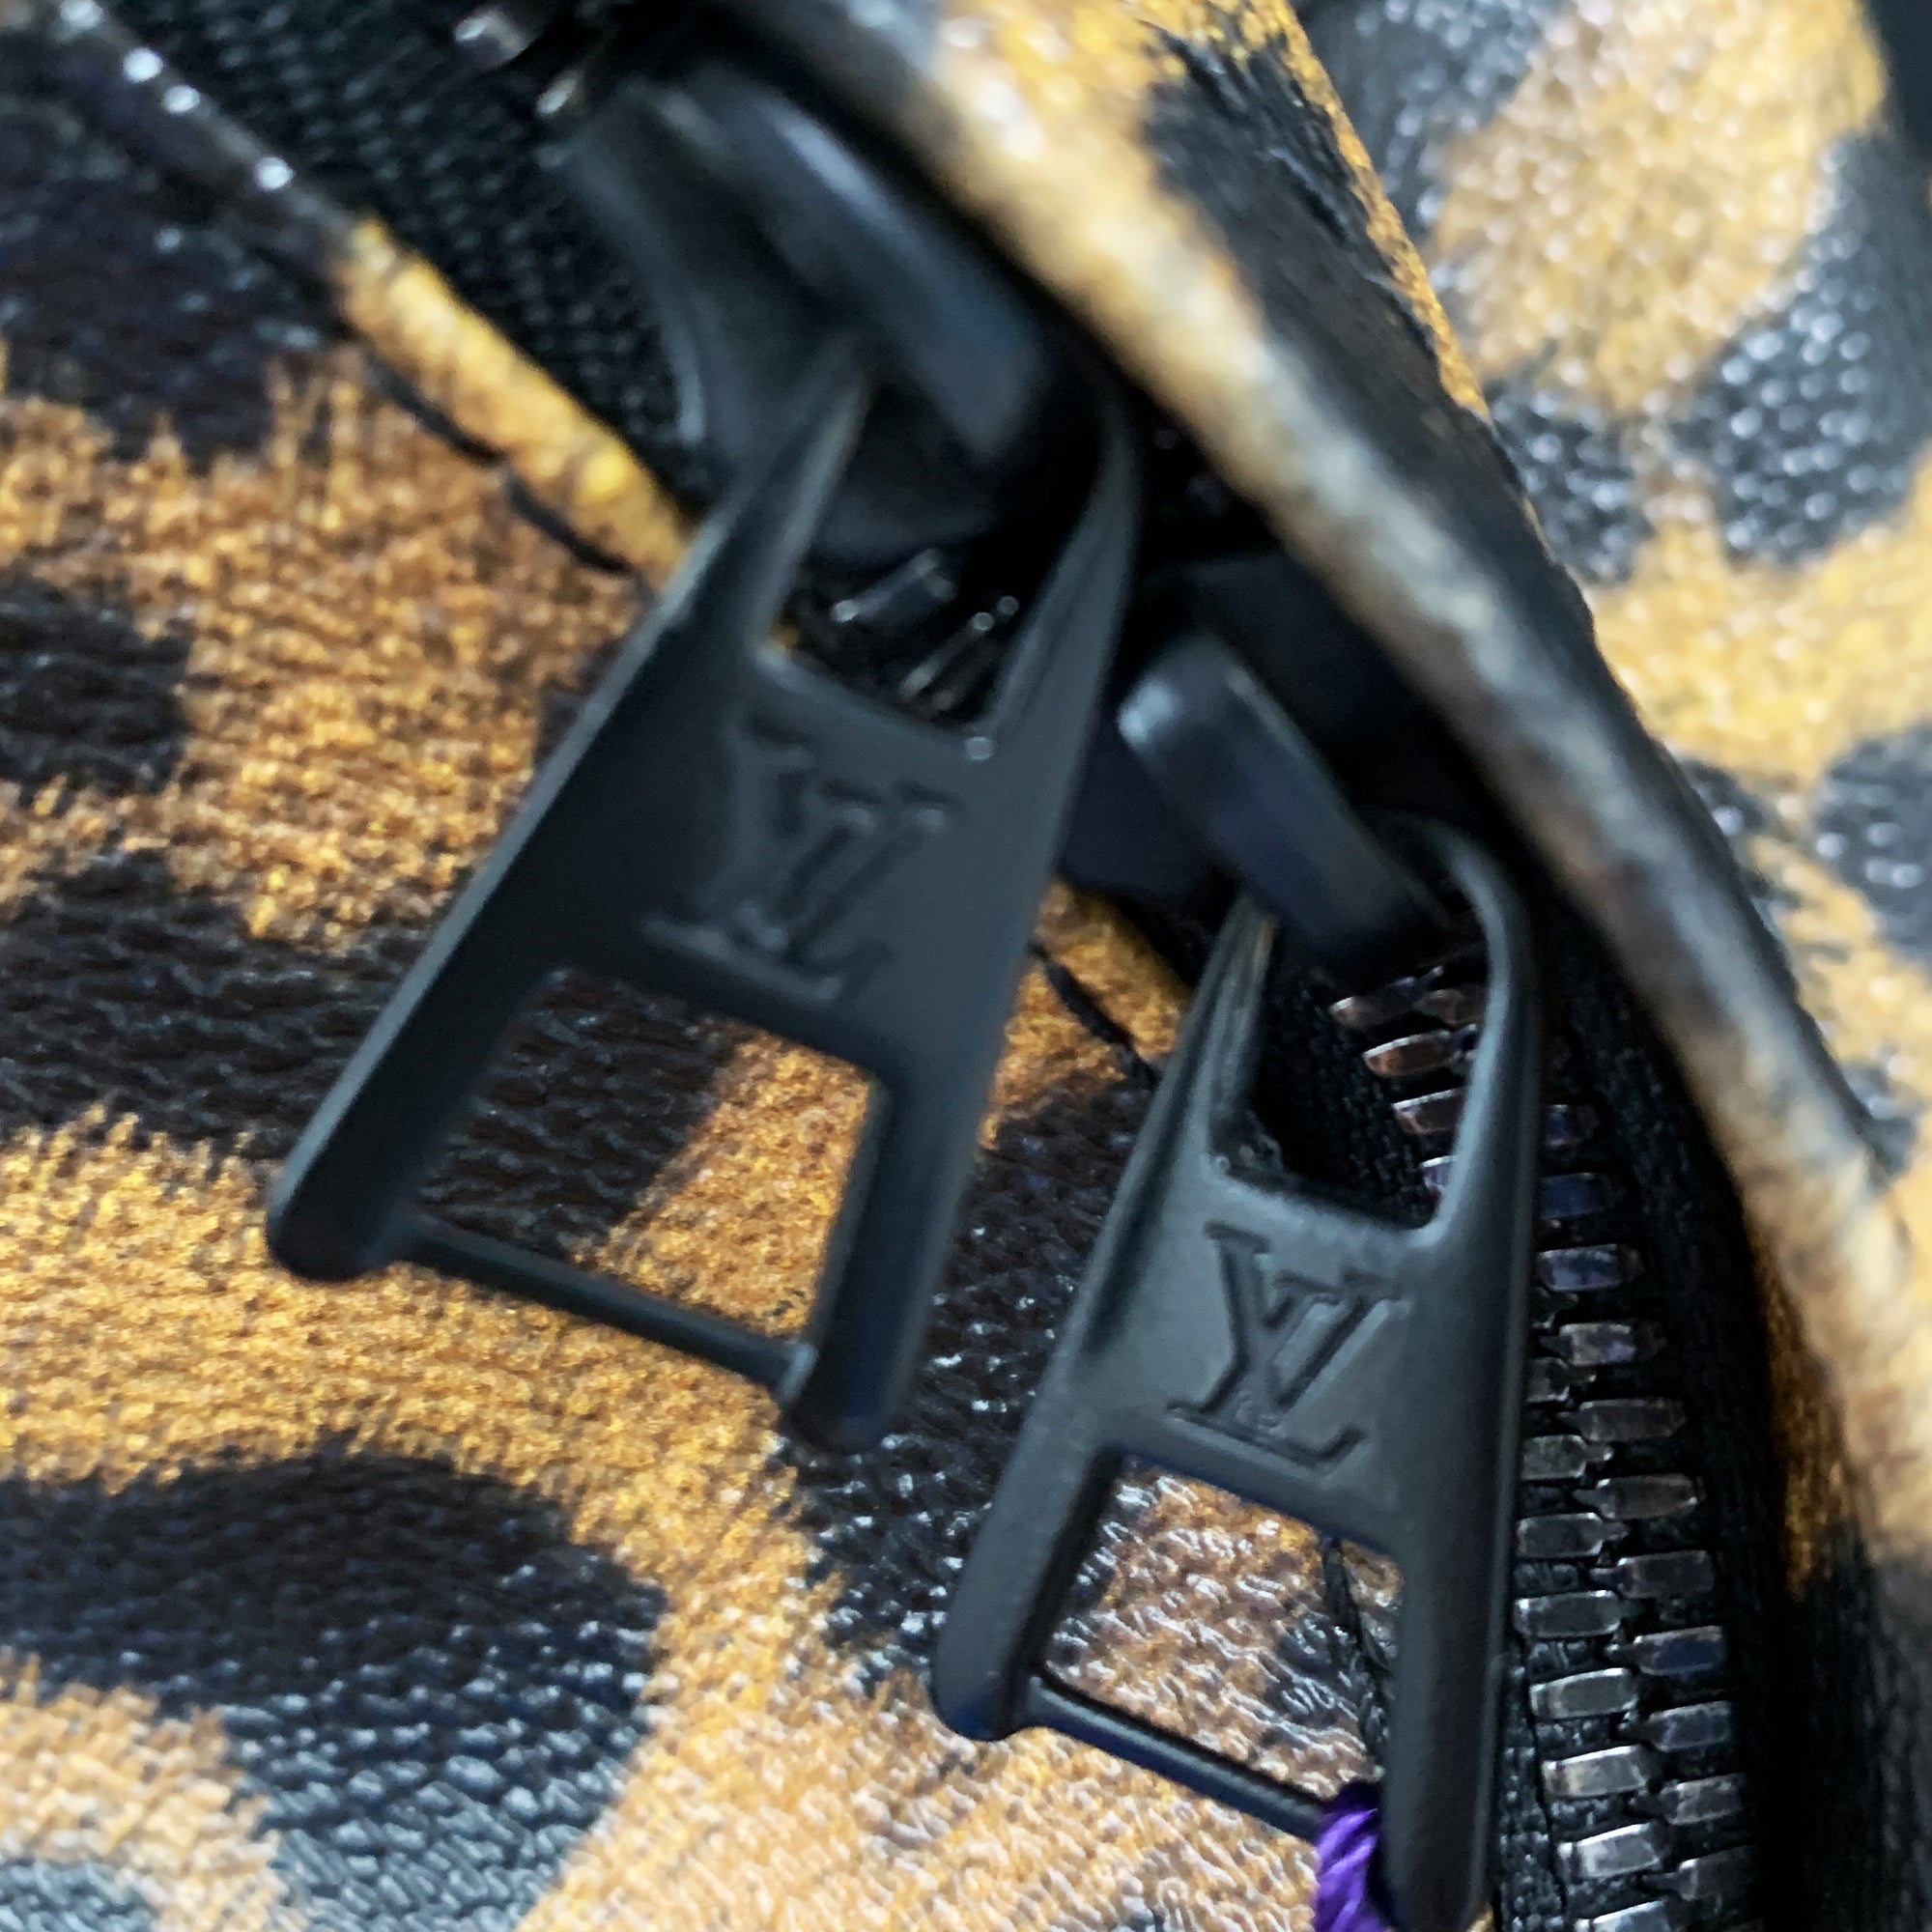 Louis Vuitton, Wild Animal Palm Springs Backpack